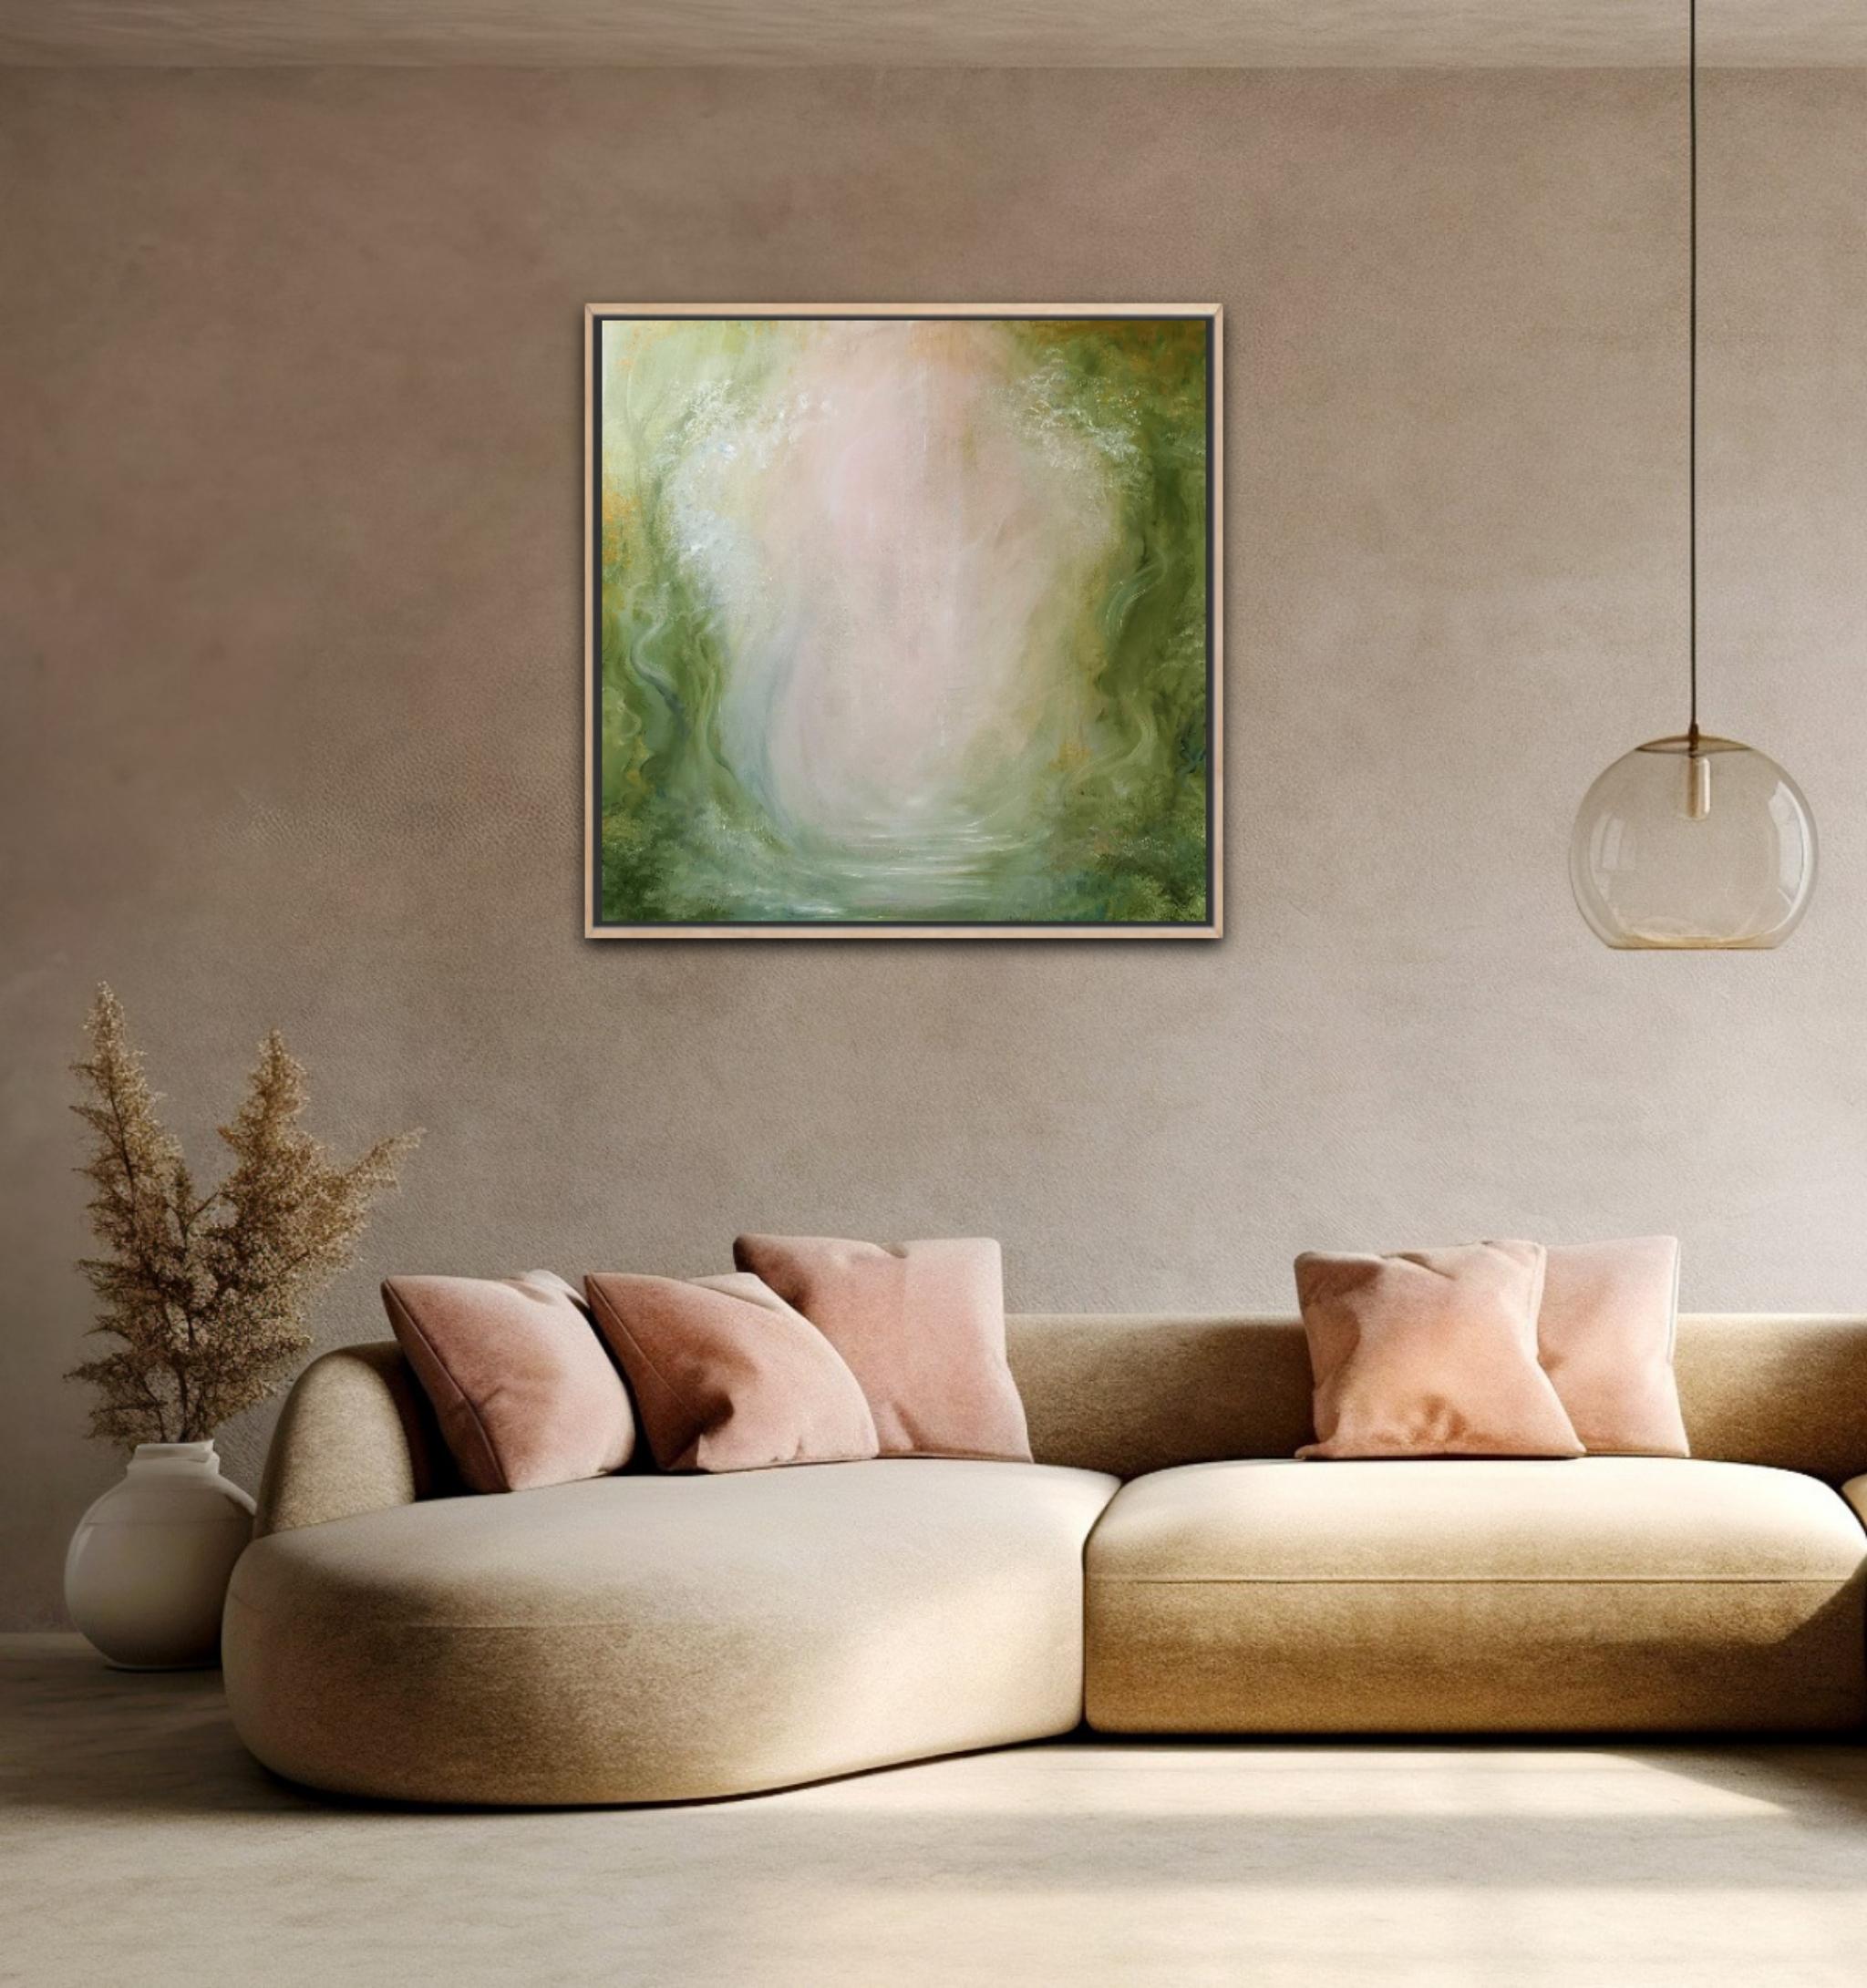 Favola - Soft, dreamy abstract landscape painting For Sale 2